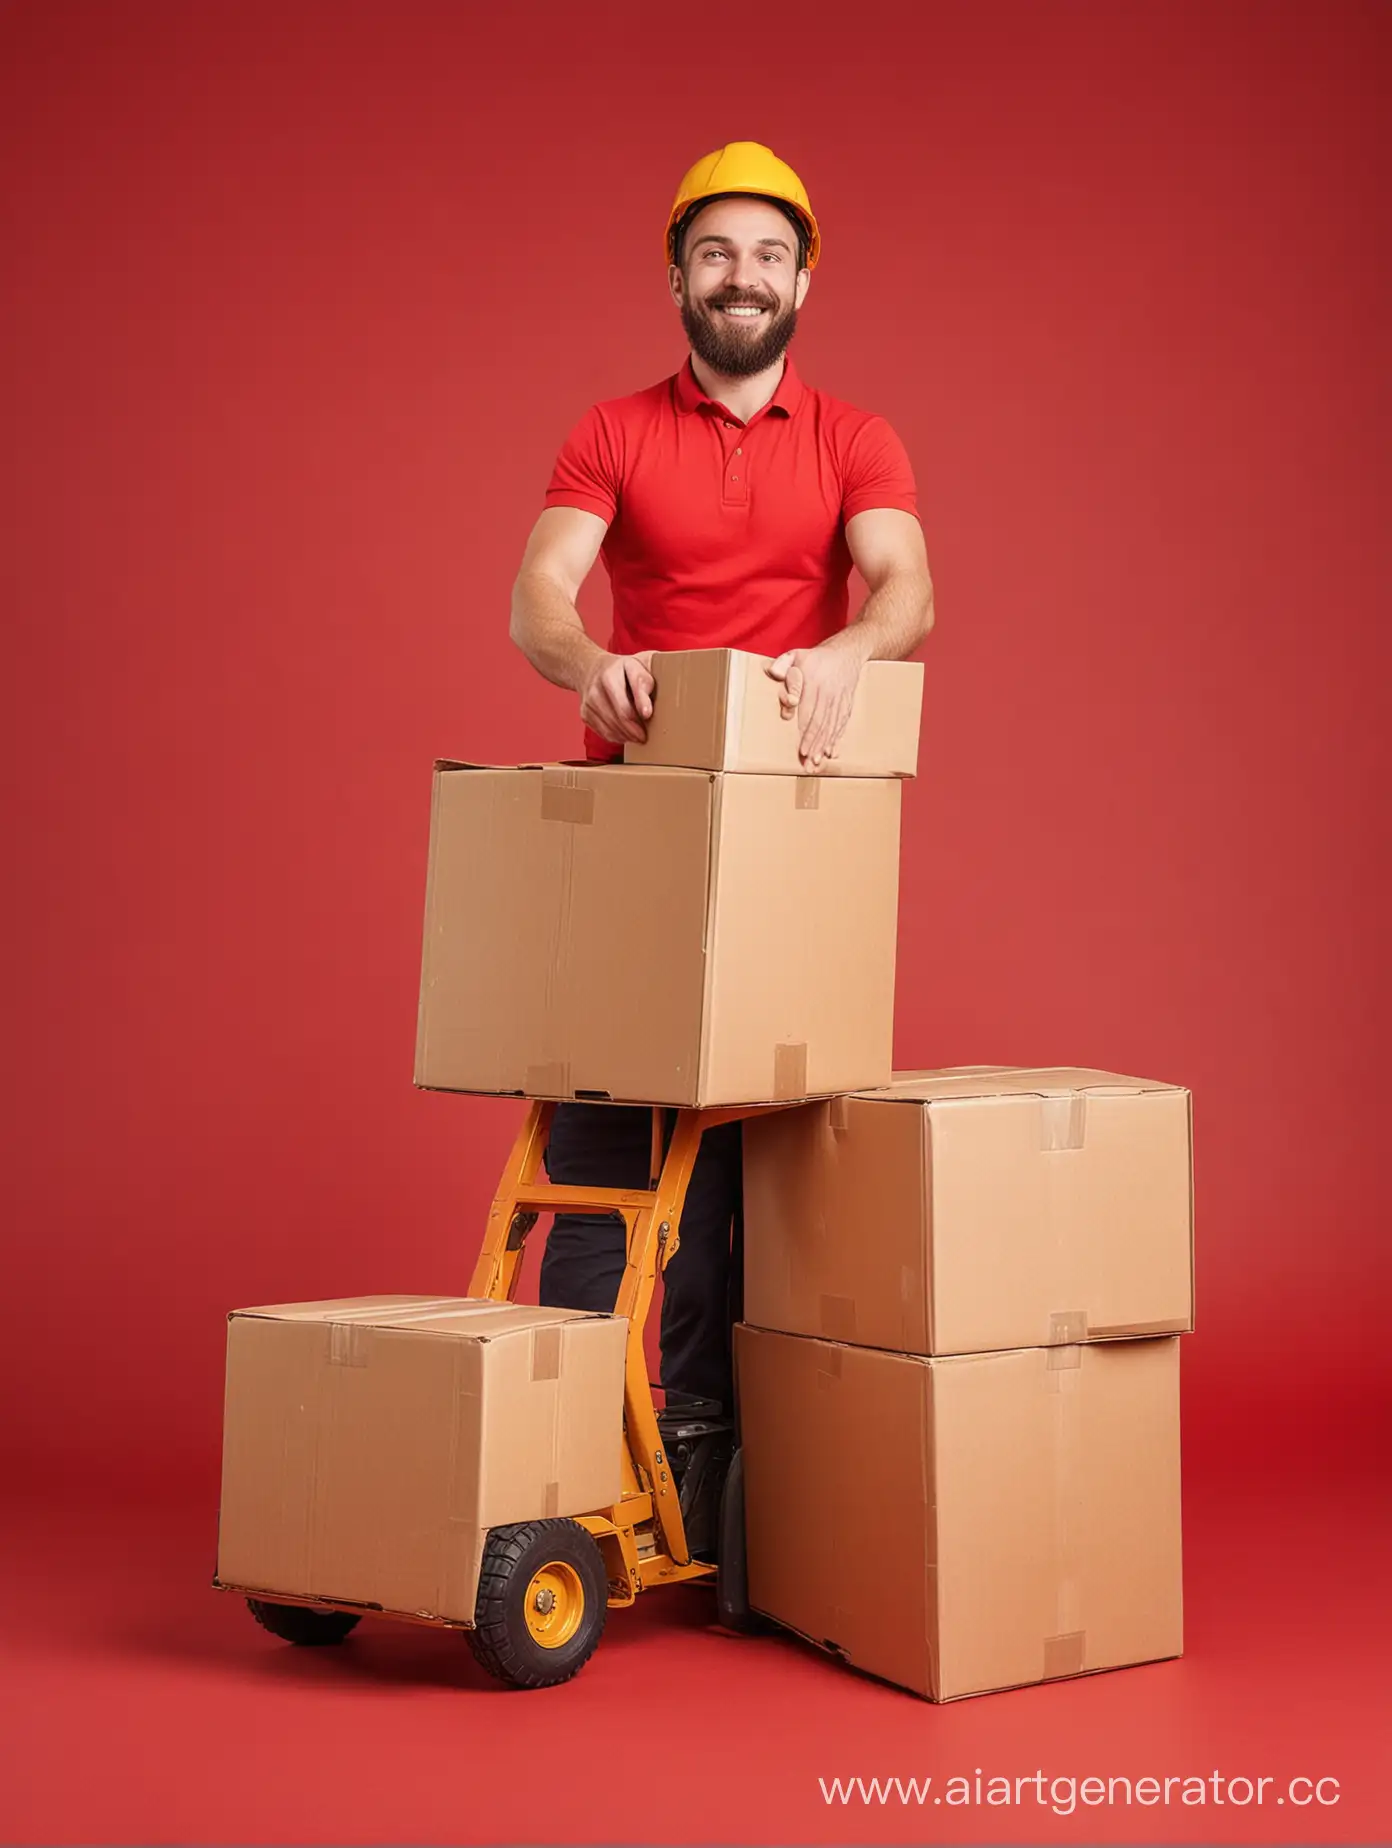 Cheerful-Loader-Carrying-Boxes-on-Vibrant-Red-Background